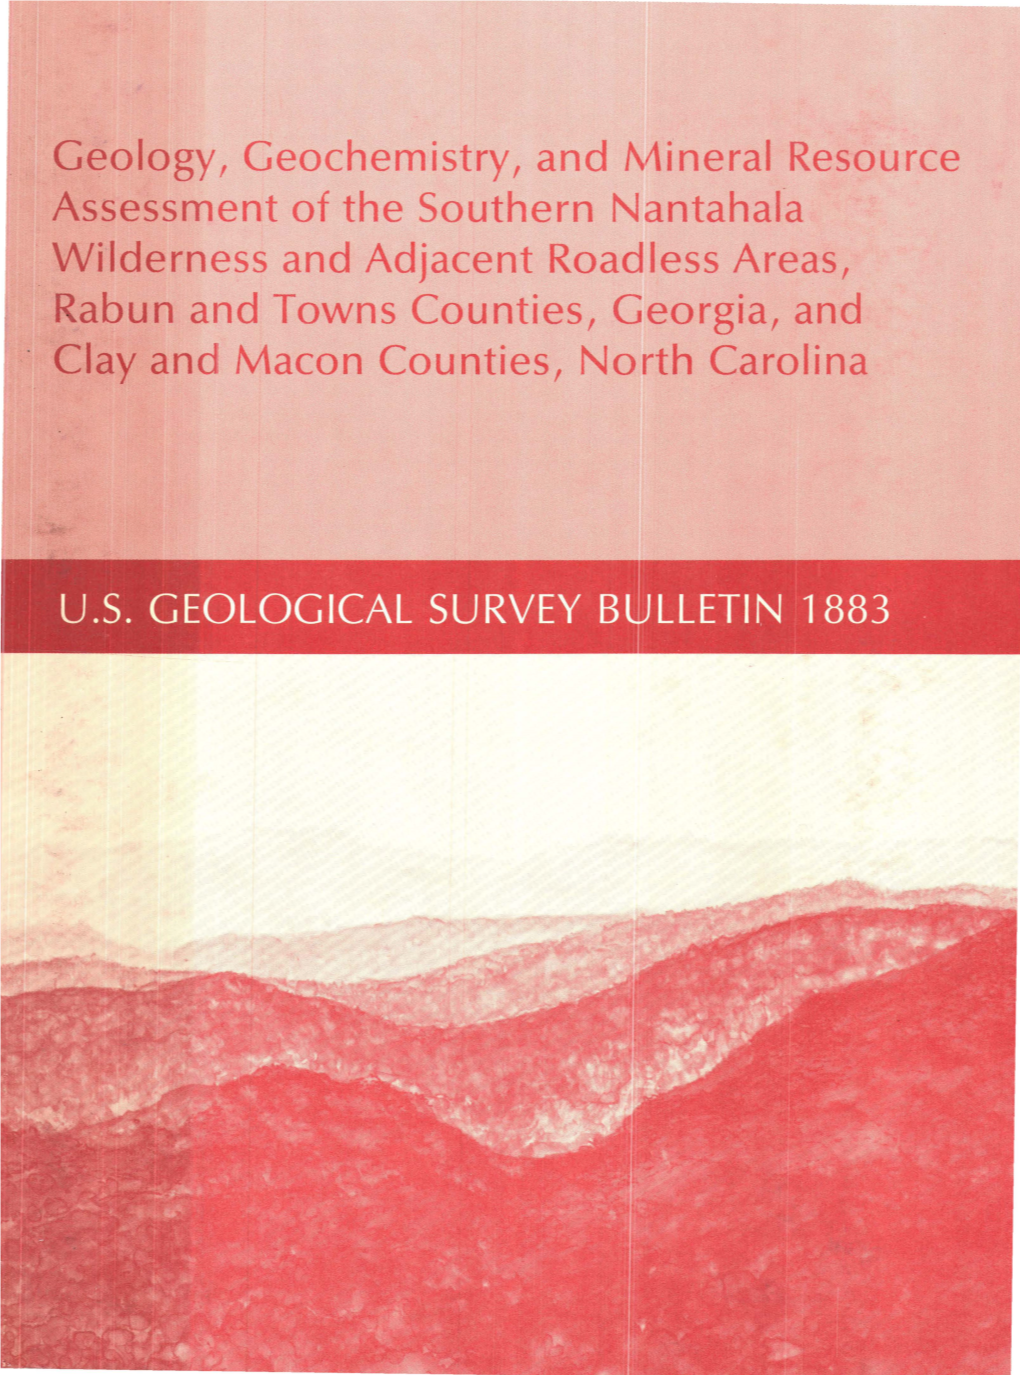 Assessment of the Southern Nantahafa Wilderness and Adjacent Roadless Areas, Rabun and Towns Counties, Georgia, and ·· Clay and Macon Counties, North Carolina